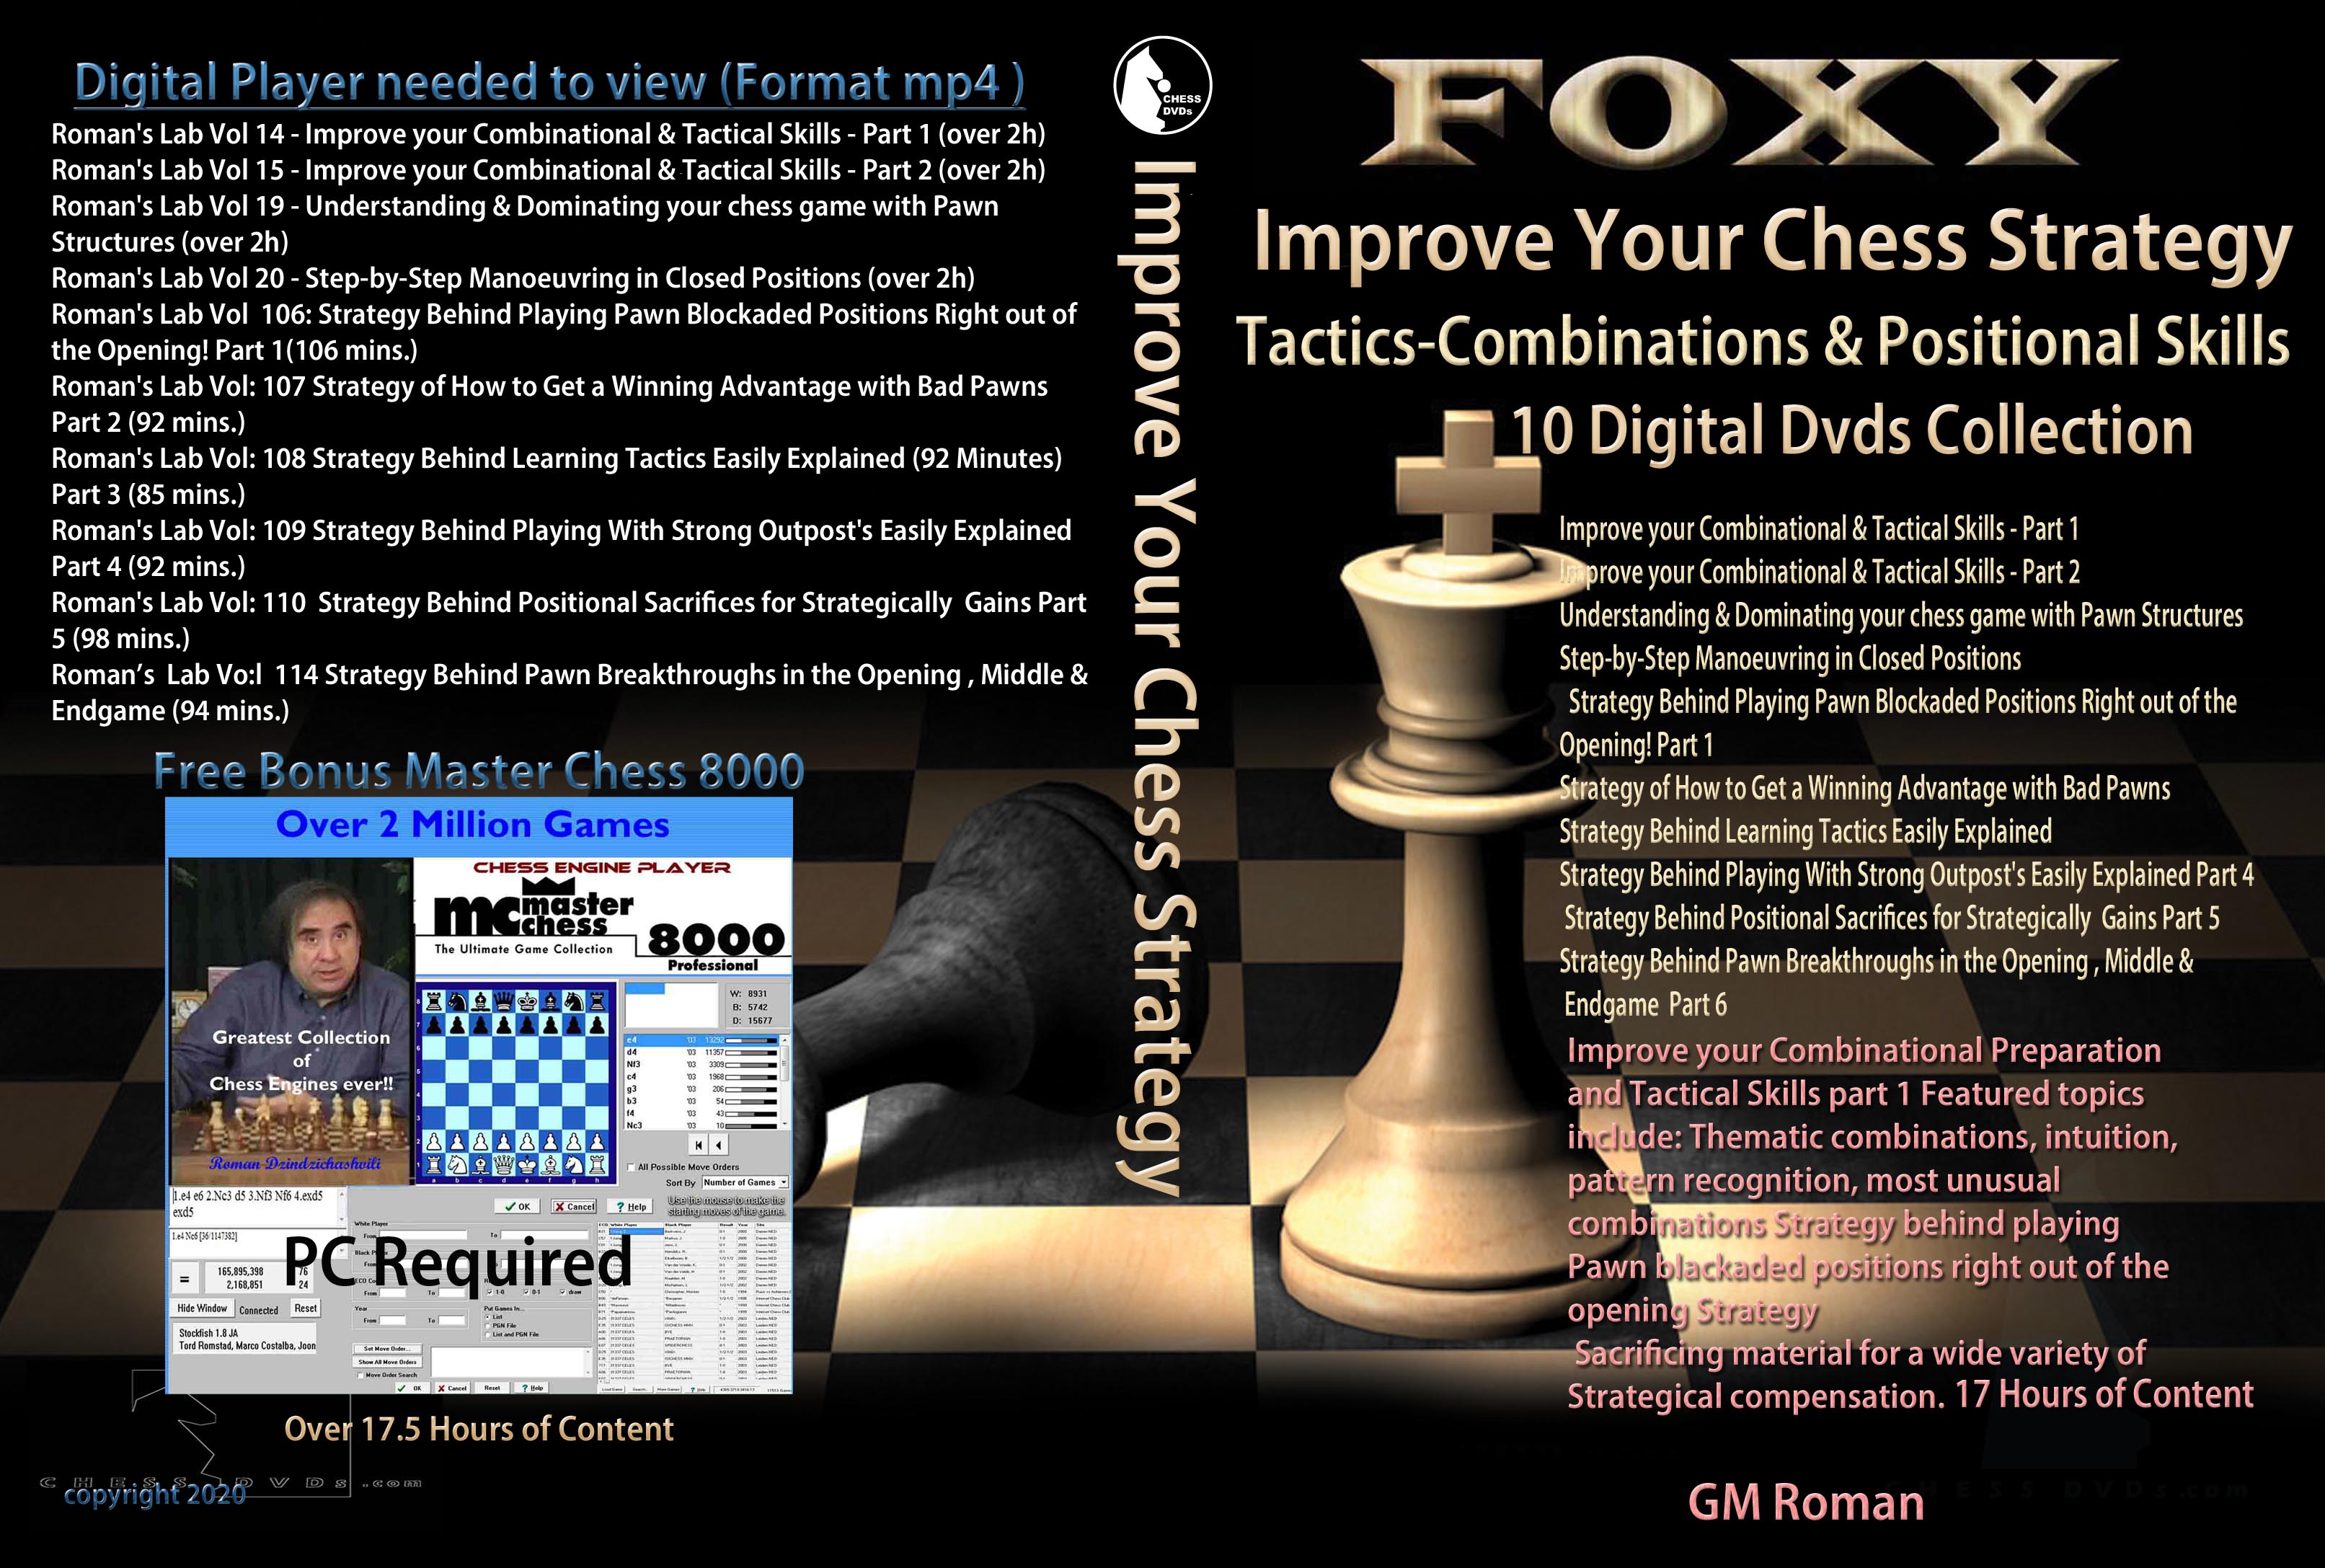 Improve Your Chess Strategy Tacties-Combinations